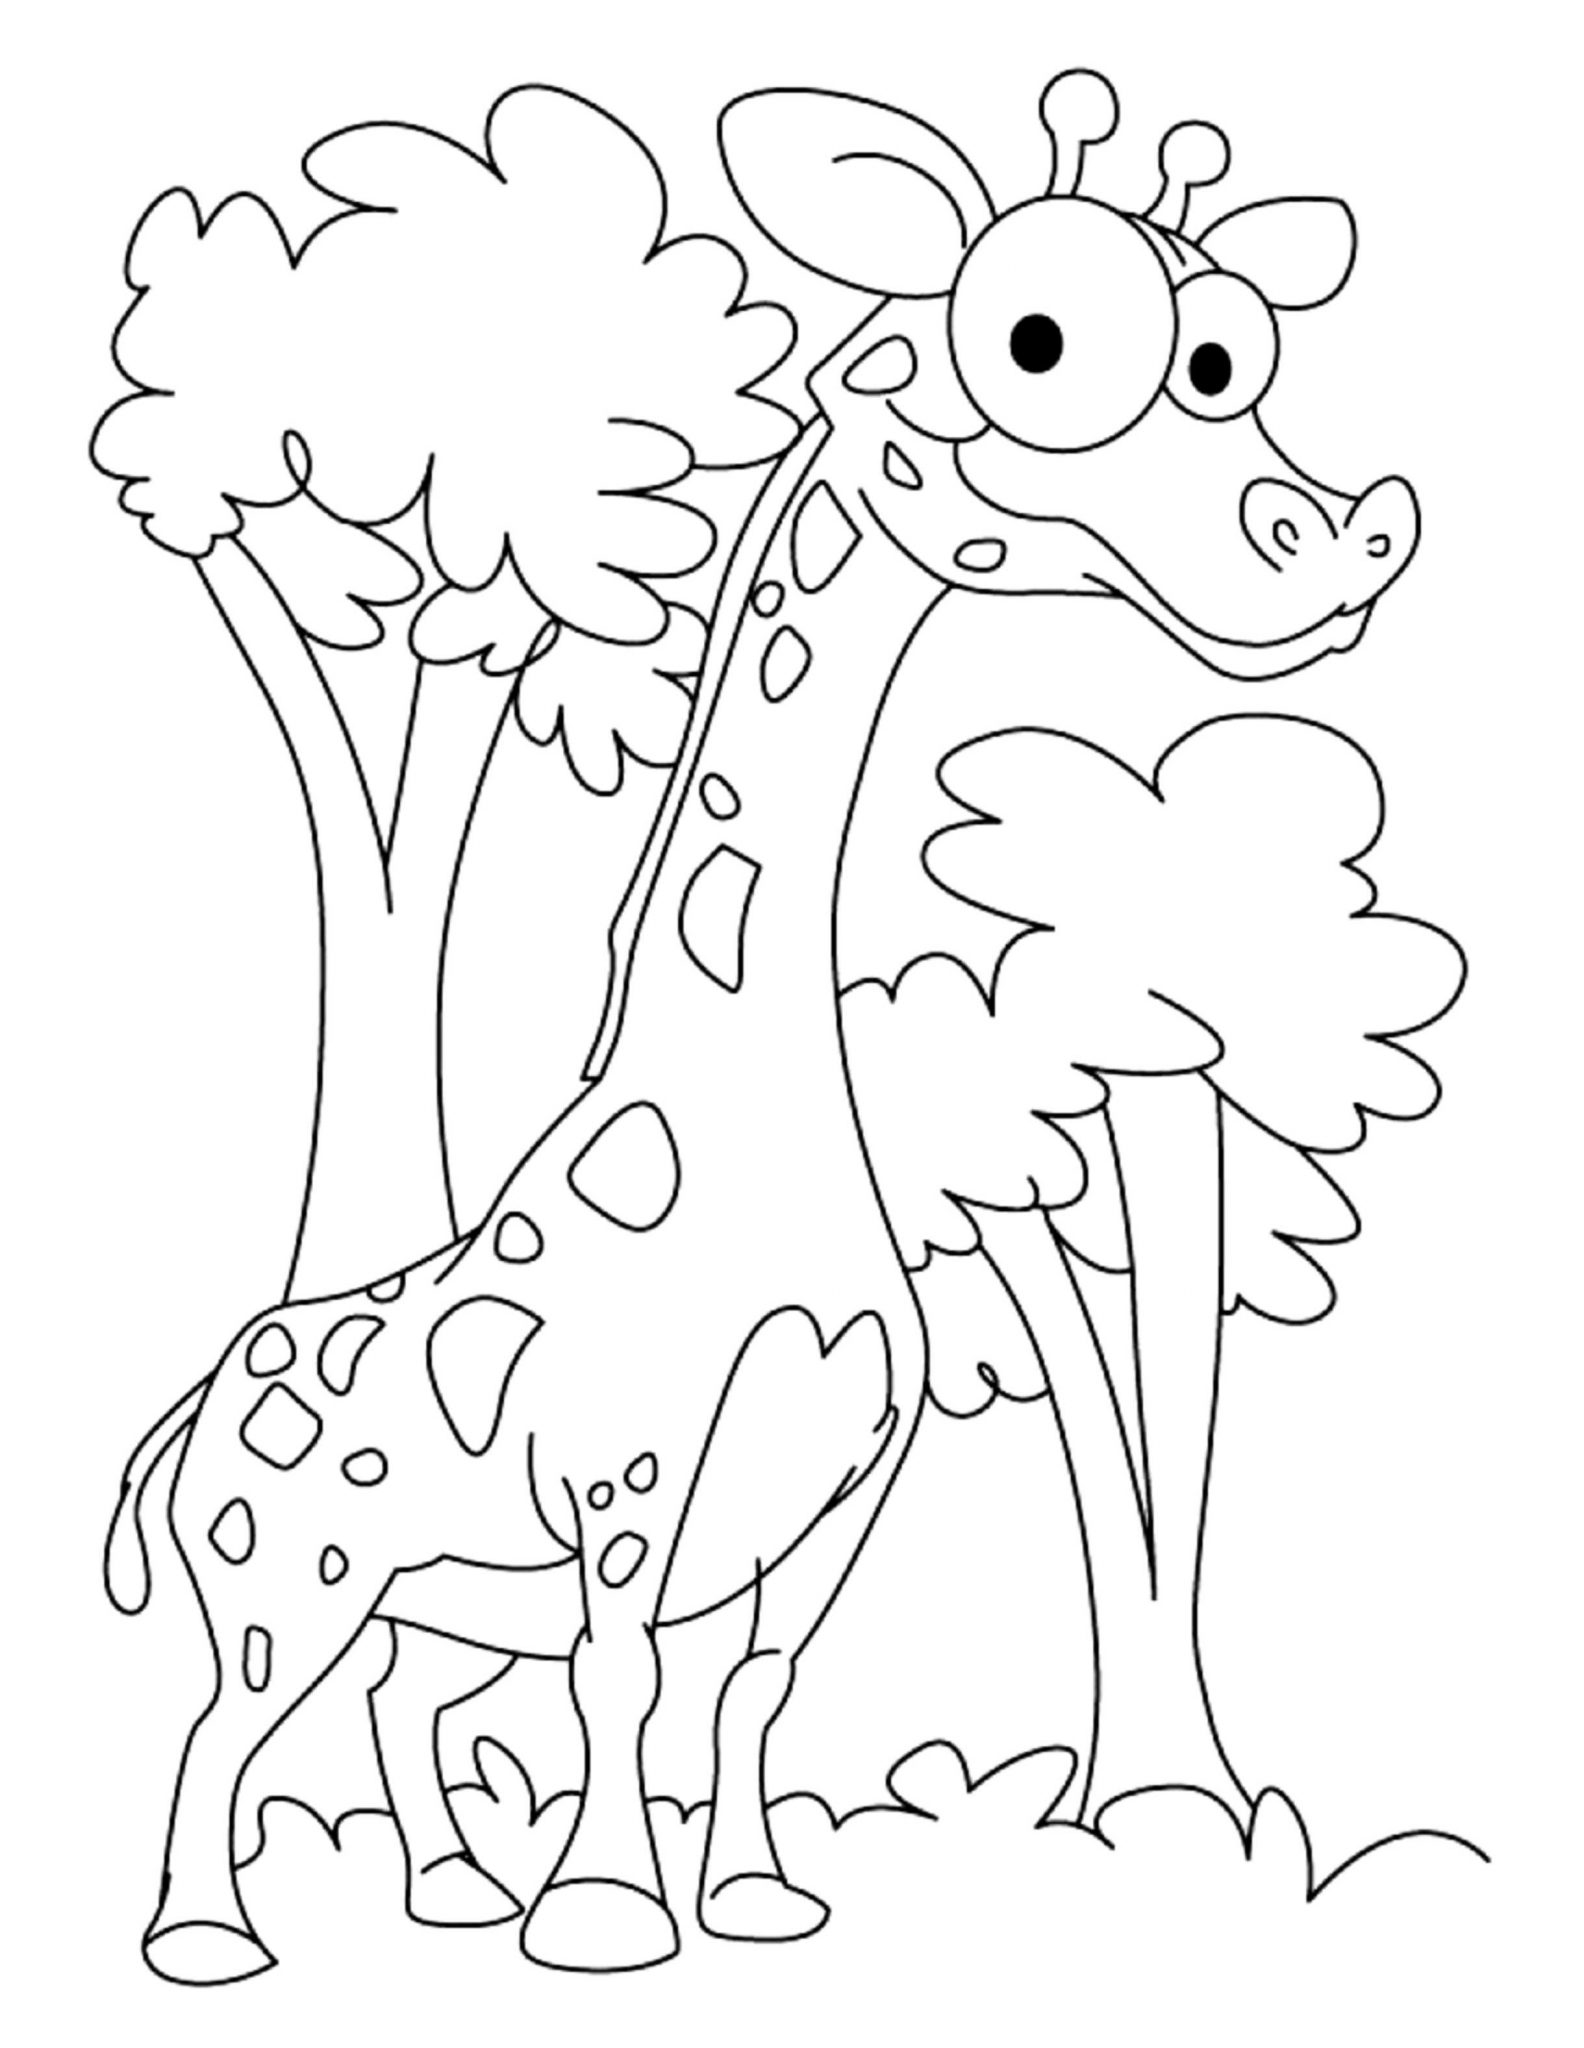 Download Giraff Coloring Pages That are Ambitious | Powell Website